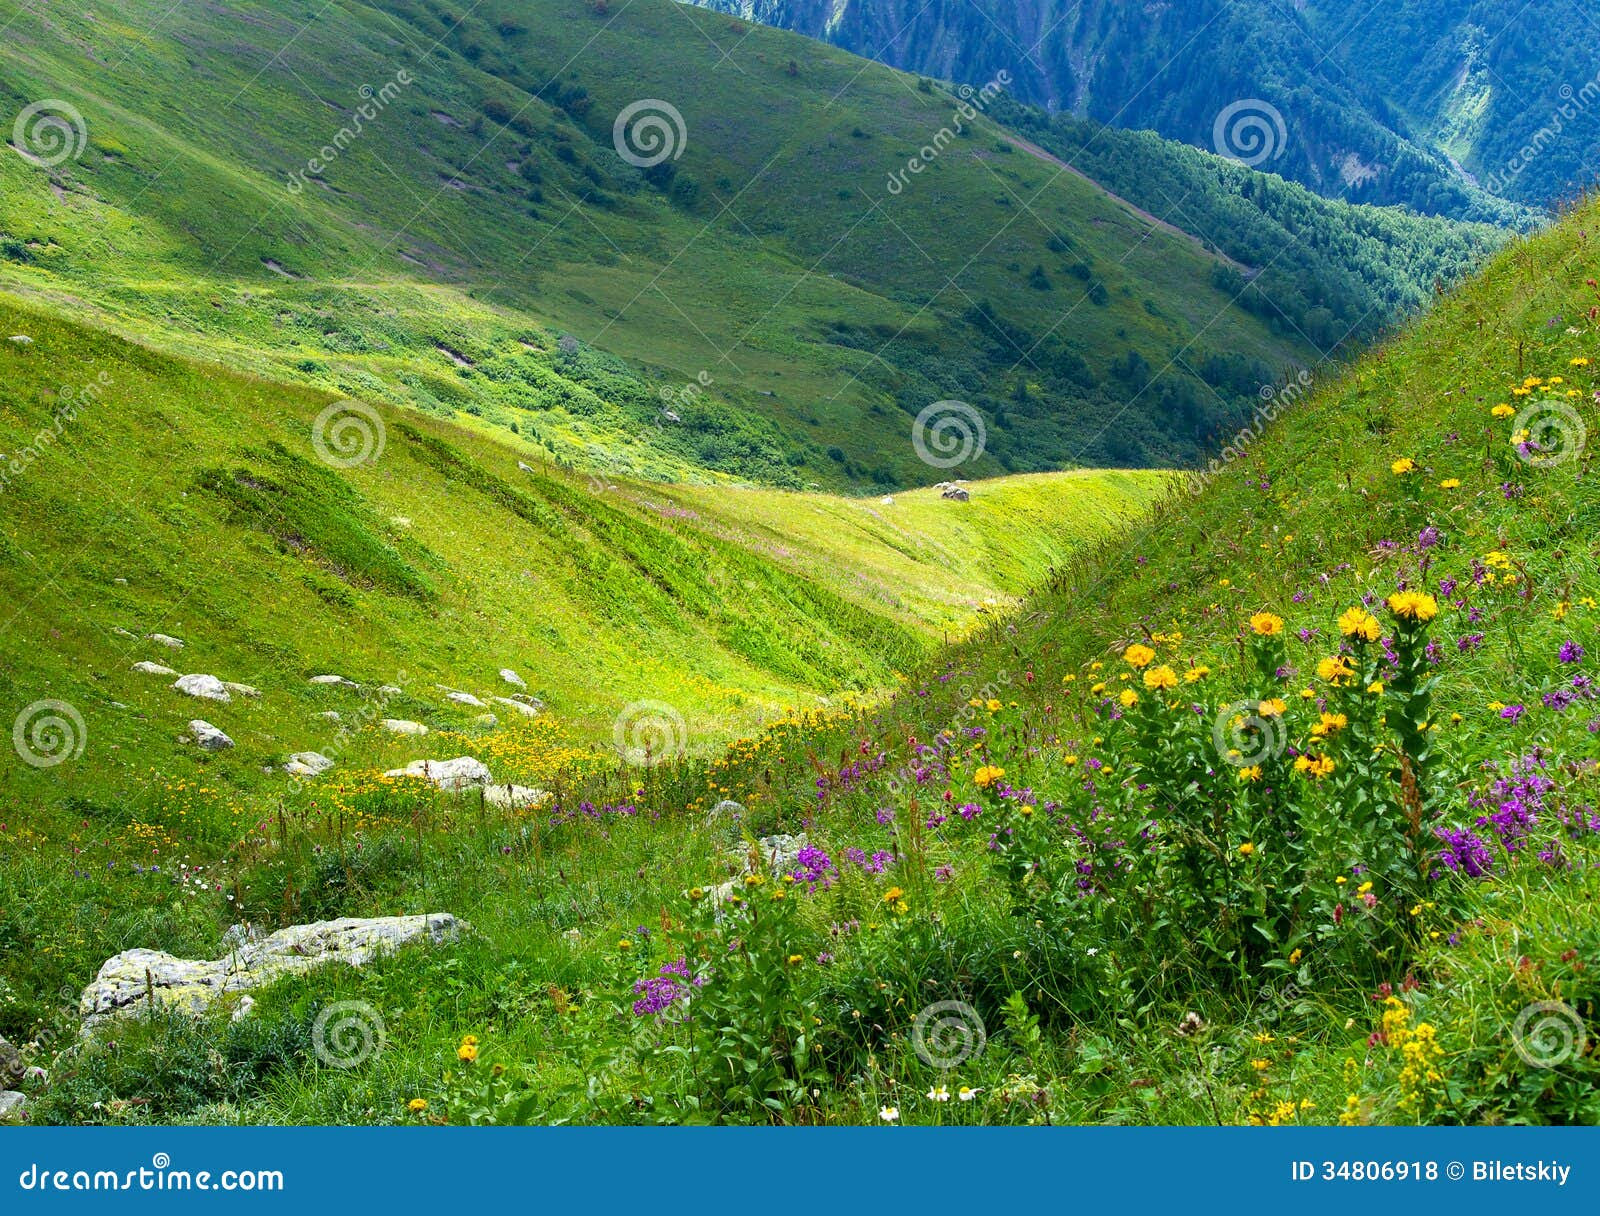 Dream Of Large Valleys Beautiful Mountains Snow Clad Mountains - Happy ...